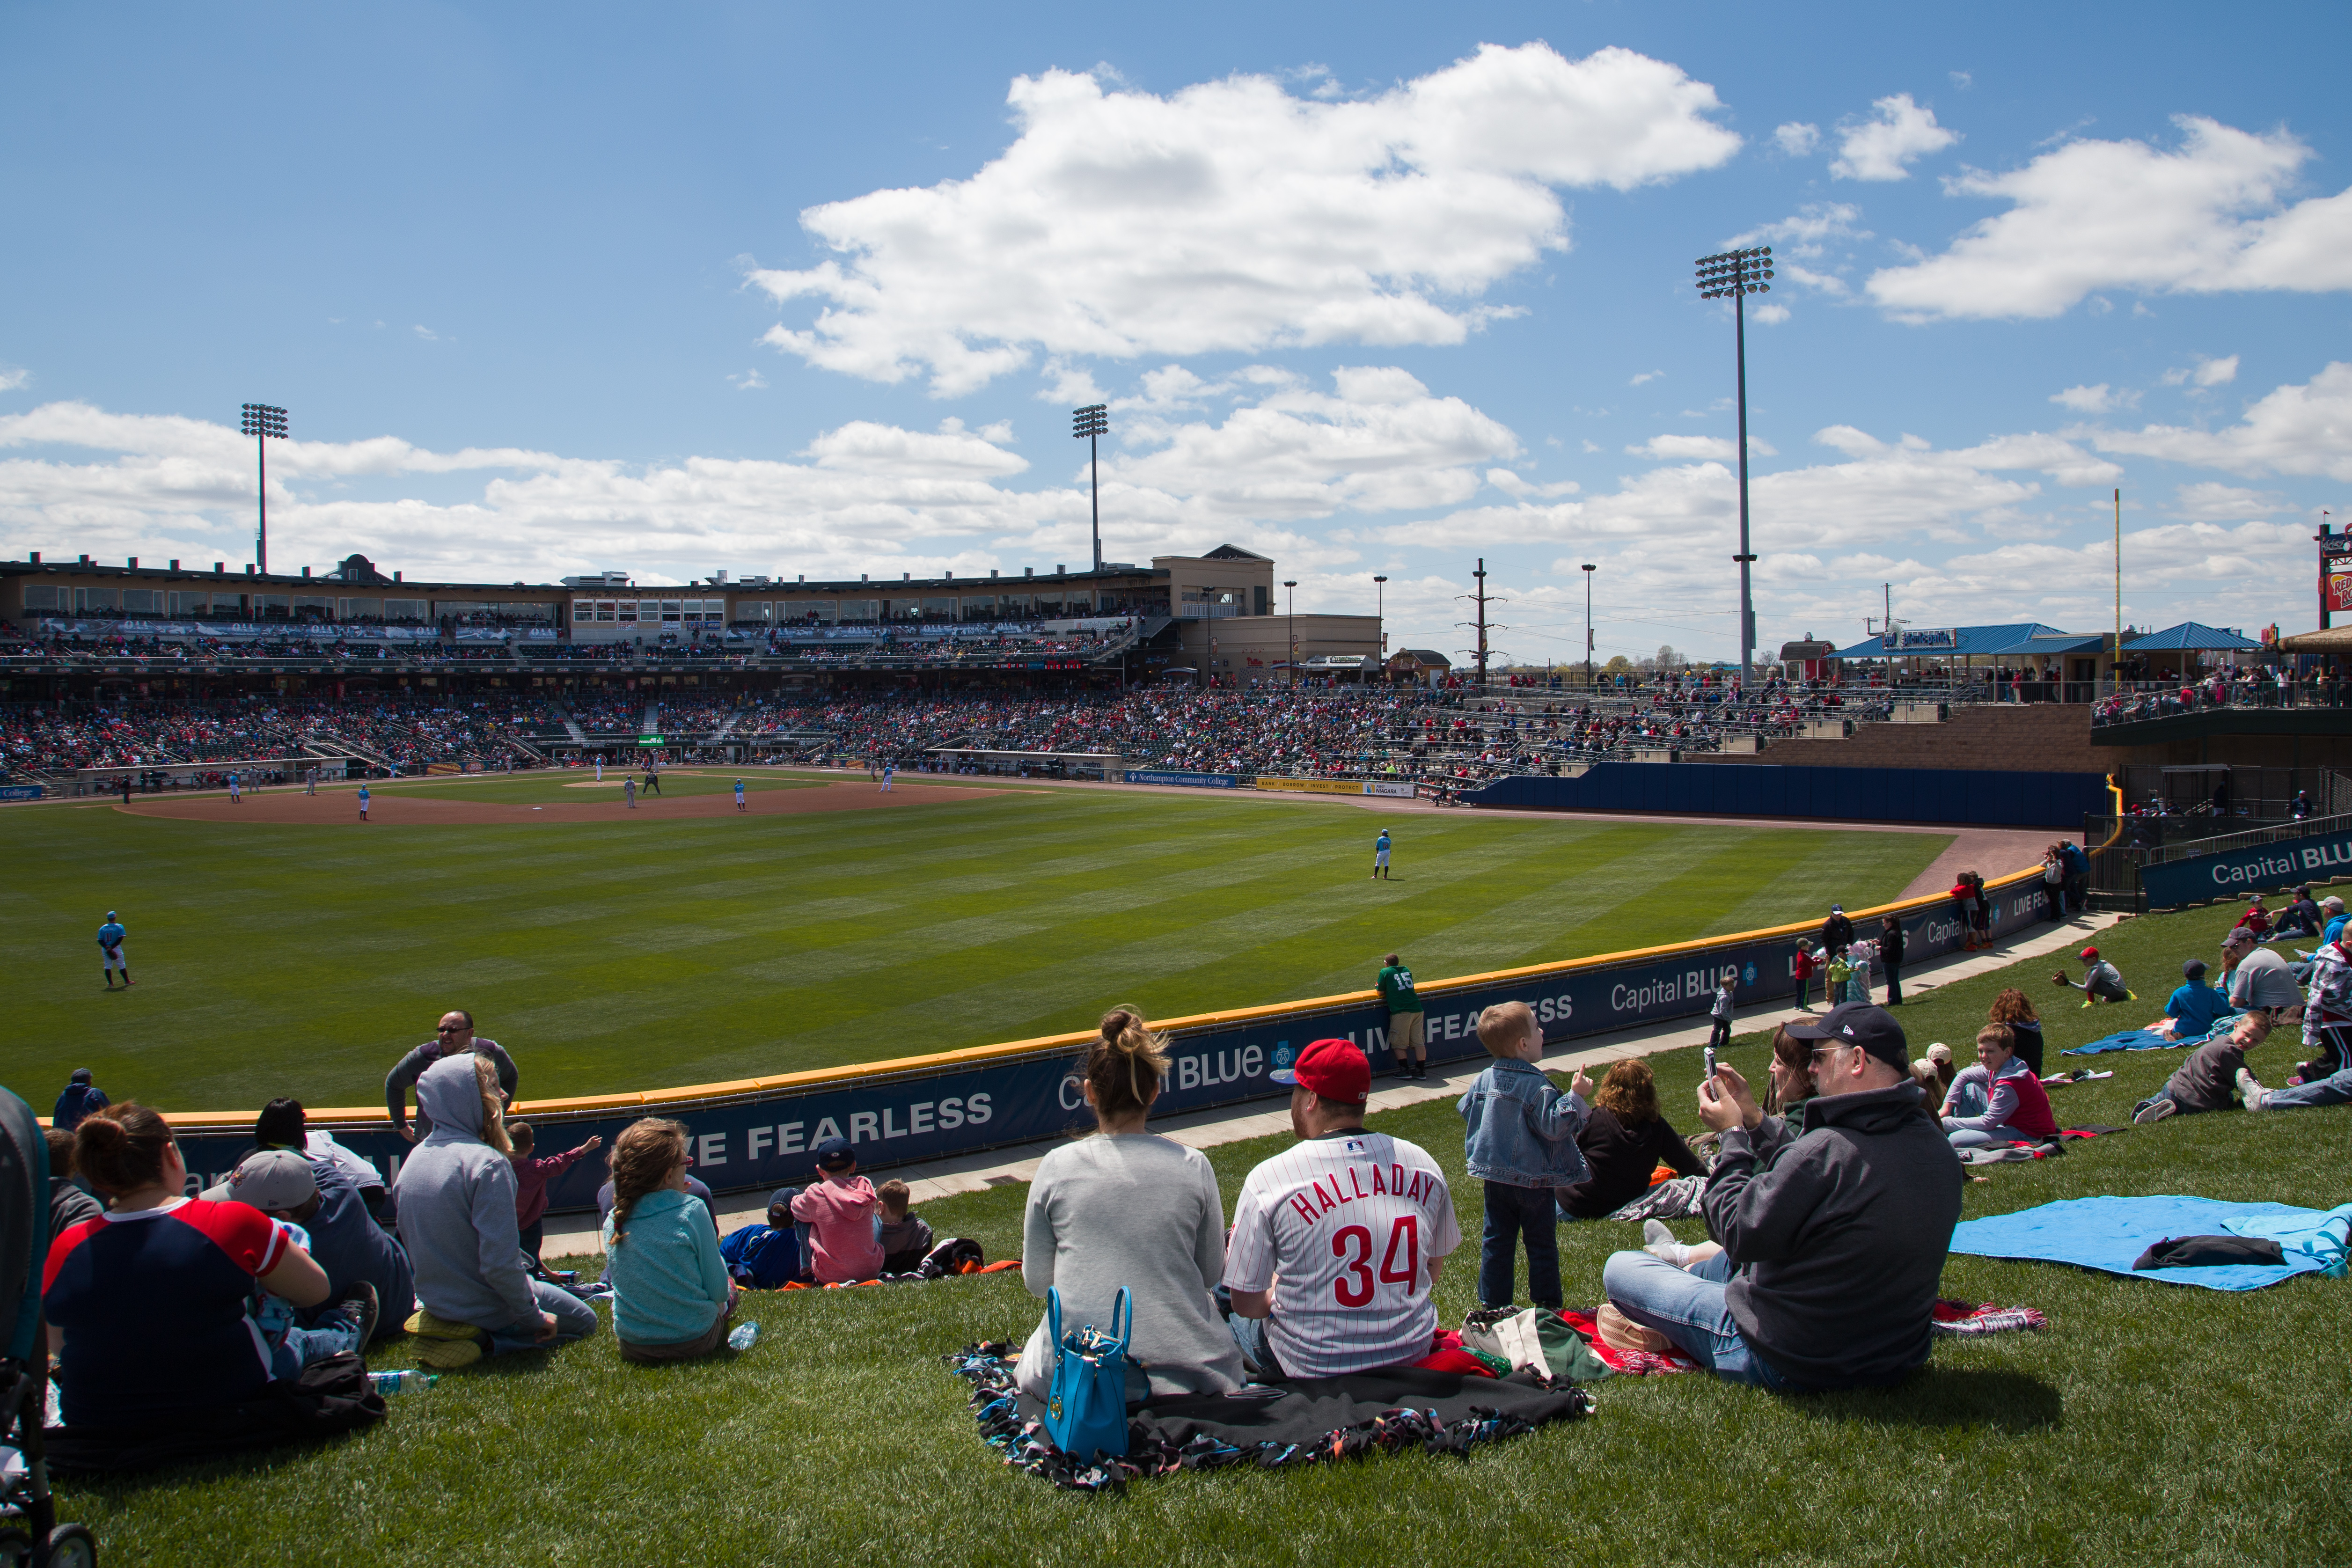 Coca-Cola Park: Home of the Ironpigs – The Lafayette